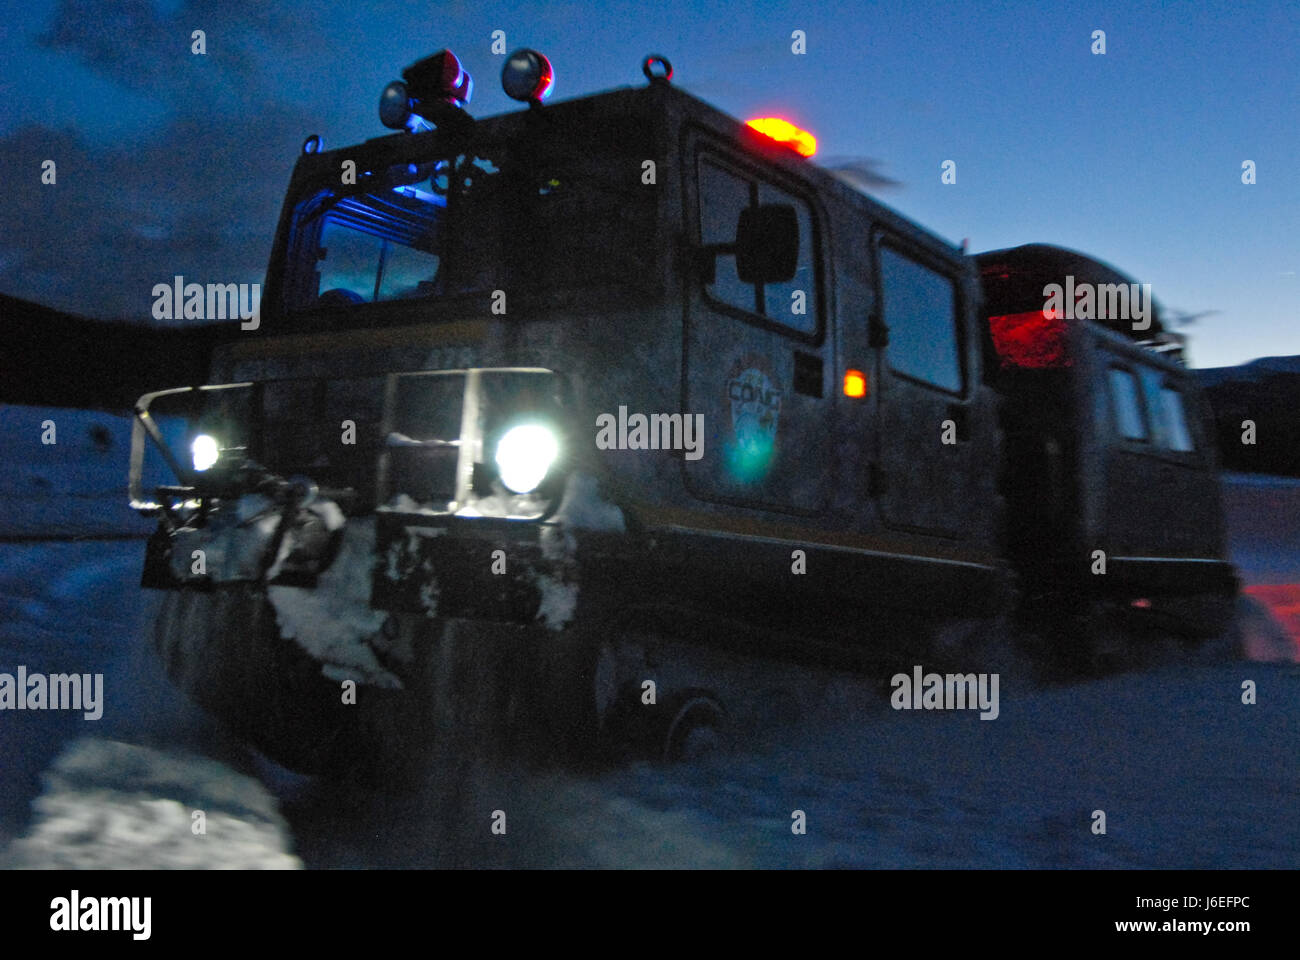 An M973A1 Small Unit Support Vehicle or SUSV, clad in emergency lights and digital camouflage, claws its way through the snow at Taylor Park Reservoir near Gunnison, Colo., March 15, 2010. The SUSV, which is capable of traversing almost any terrain, is the primary vehicle used by the Colorado Army National Guard’s Snow Response Team. This relatively unknown asset can be used by the SRT to assist state and local rescue teams during nearly every type of disaster, state emergency or search and rescue. (U.S. Army National Guard photo by Spc. Joseph K. VonNida, Colorado National Guard) Stock Photo